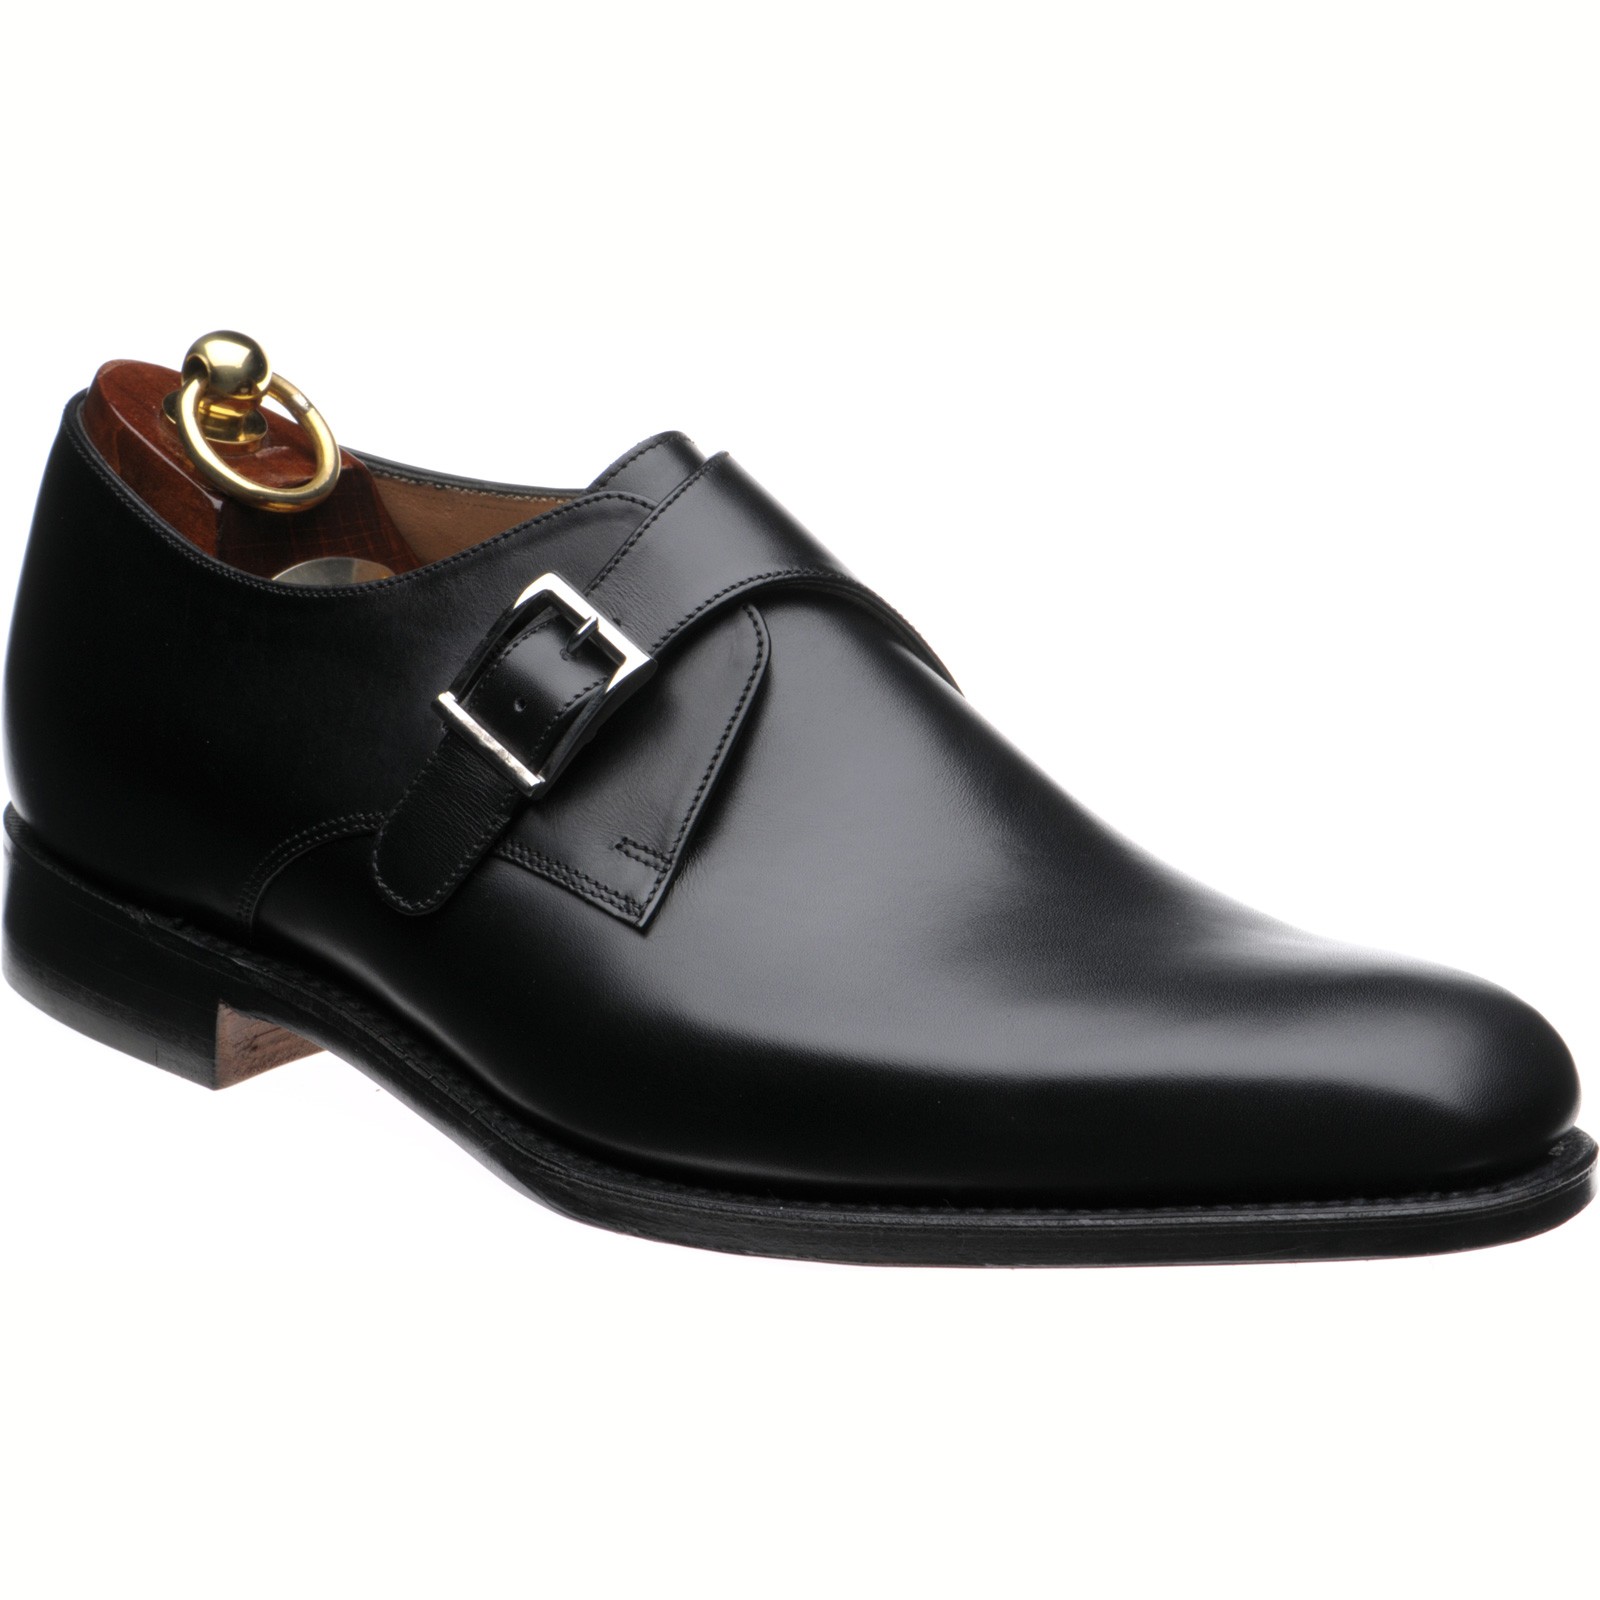 Loake shoes | Loake 1880 Classic | Medway monk shoes in Black Calf at ...